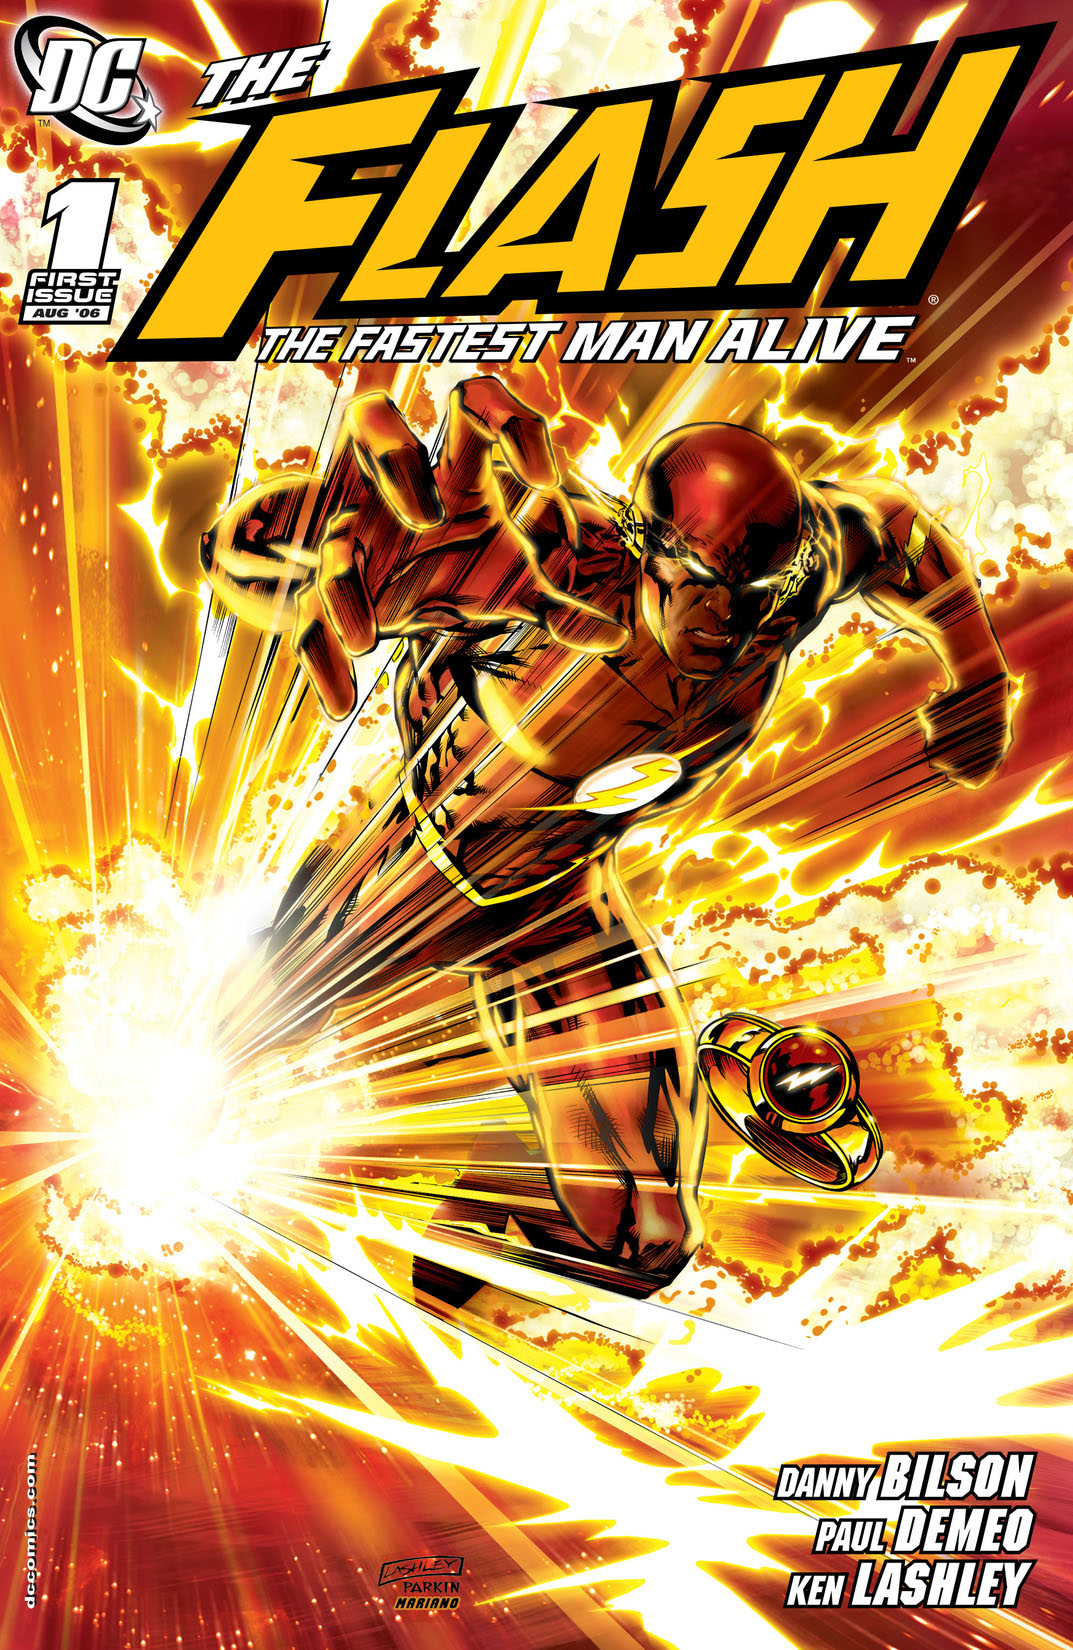 Flash: The Fastest Man Alive #1 preview images